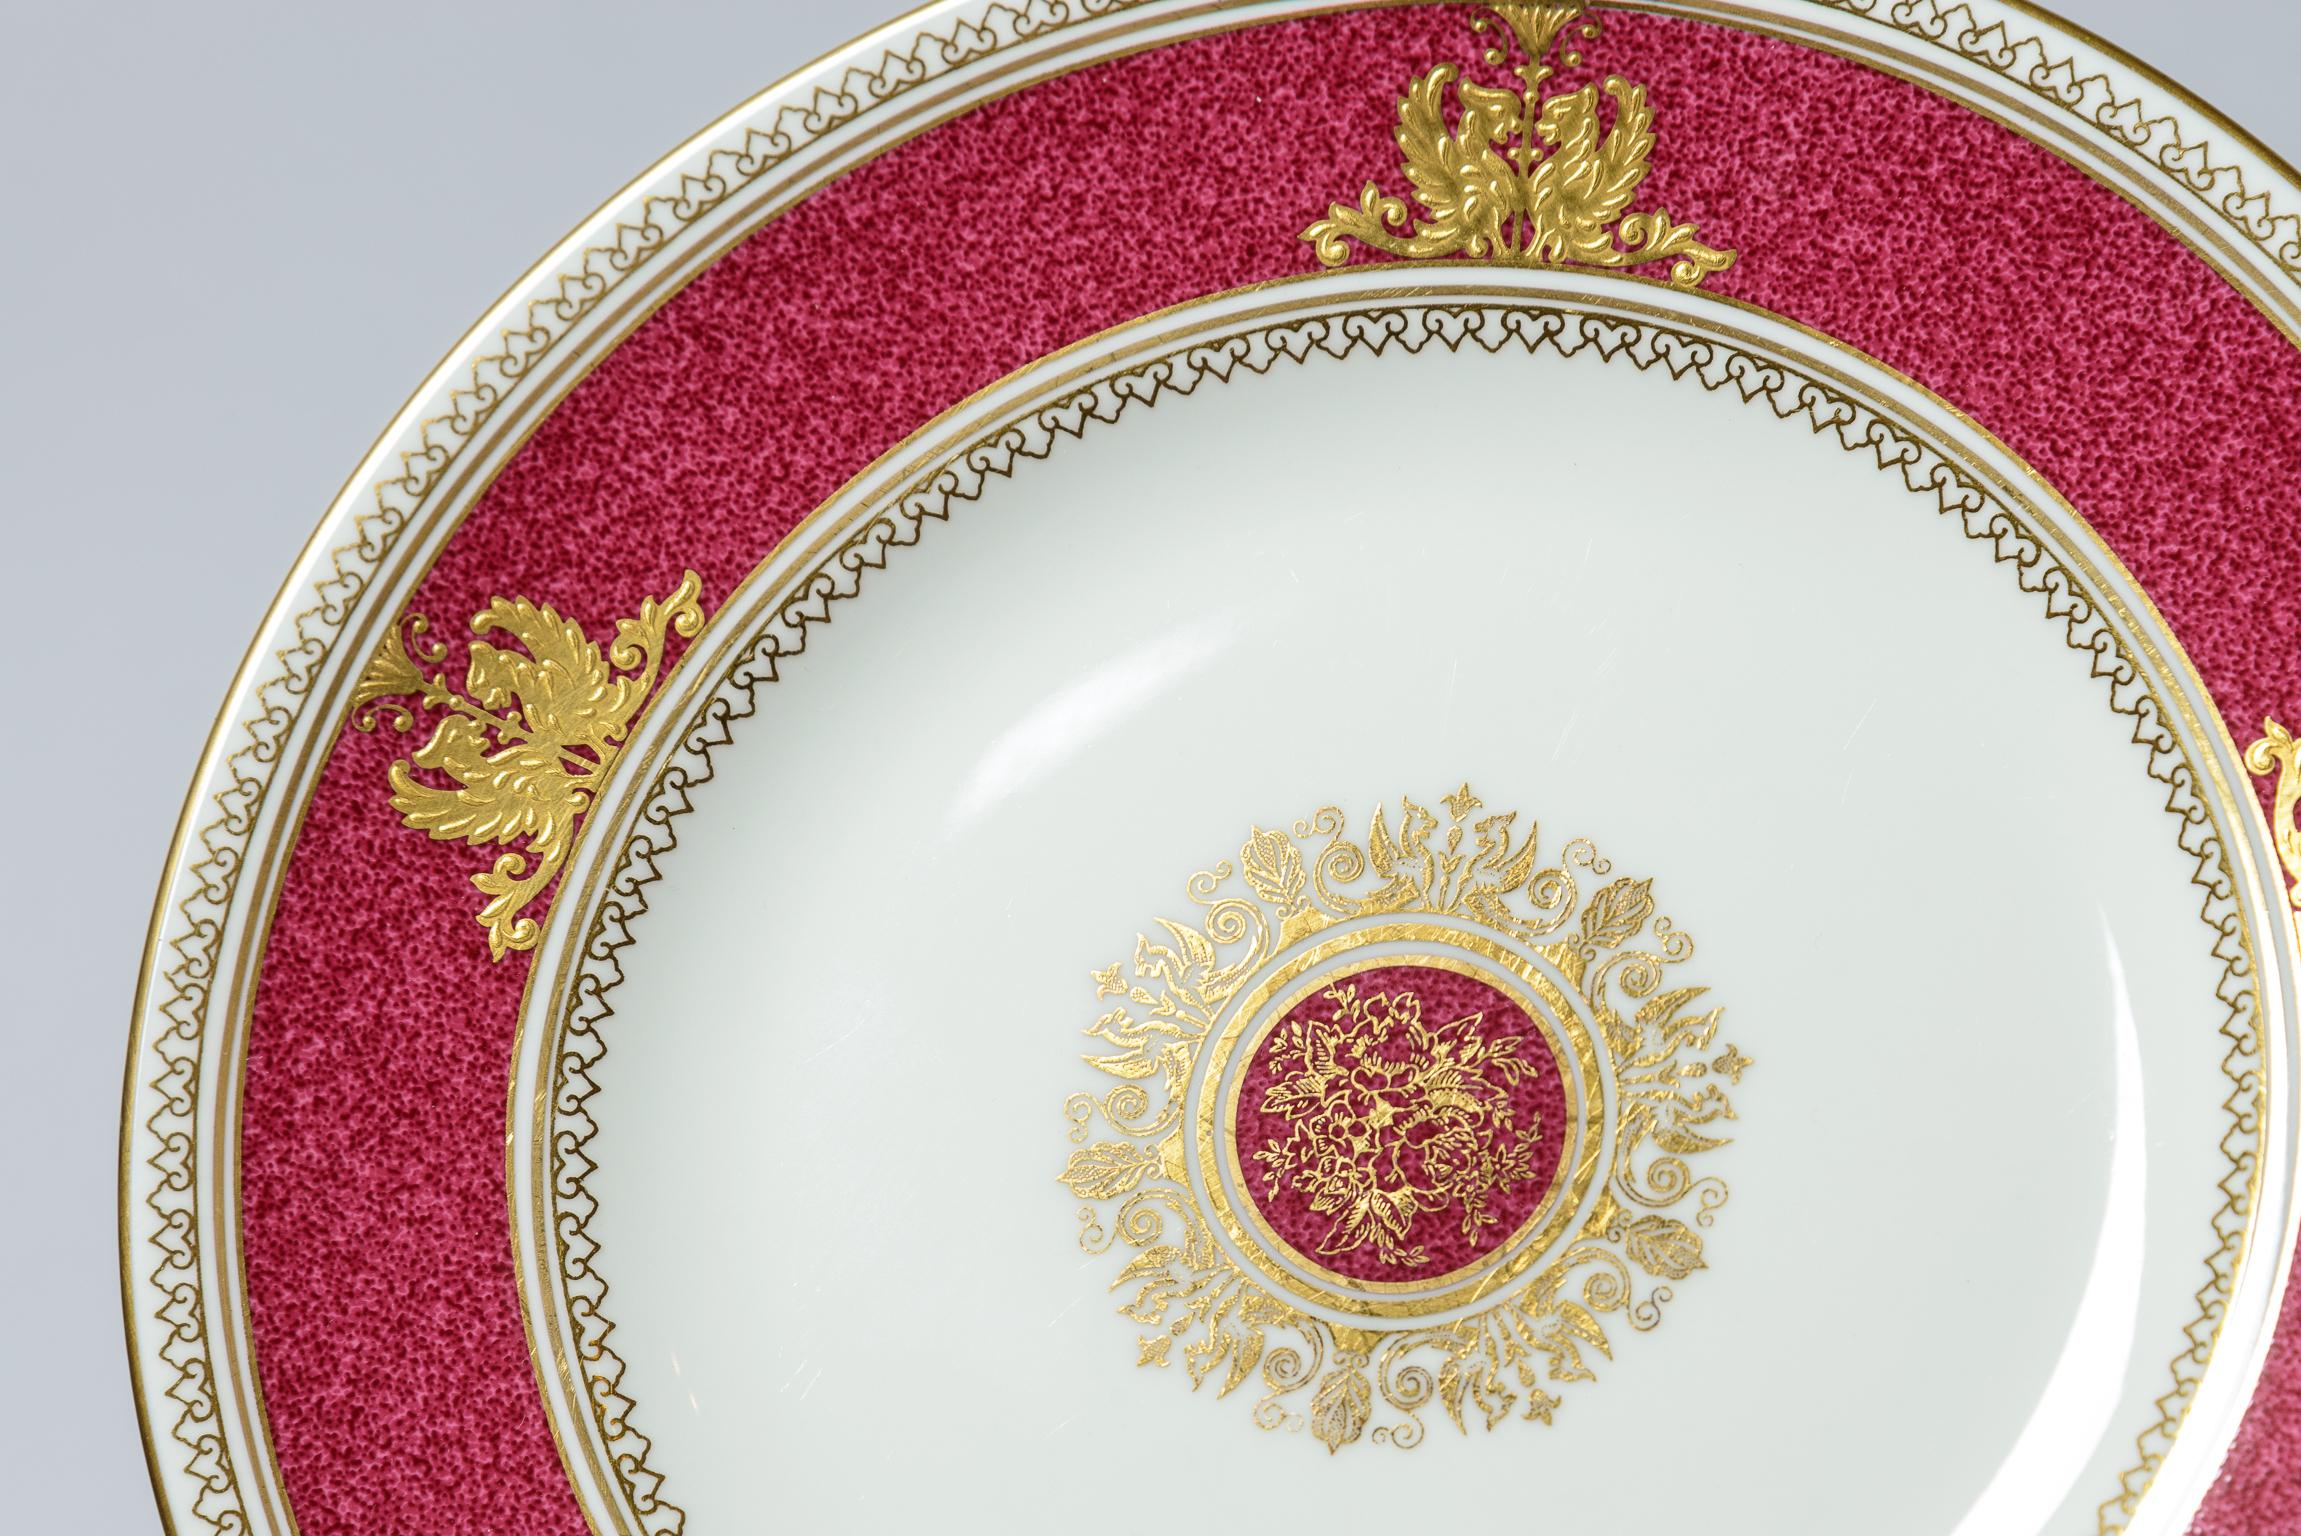 A pretty set of 16 plates with a ruby powder finished collar accented with a raised double griffin gilt motif and central floral medallion. Classic and elegant and on Wedgwood's crisp white bone porcelain. The eight inch size is very flexible and